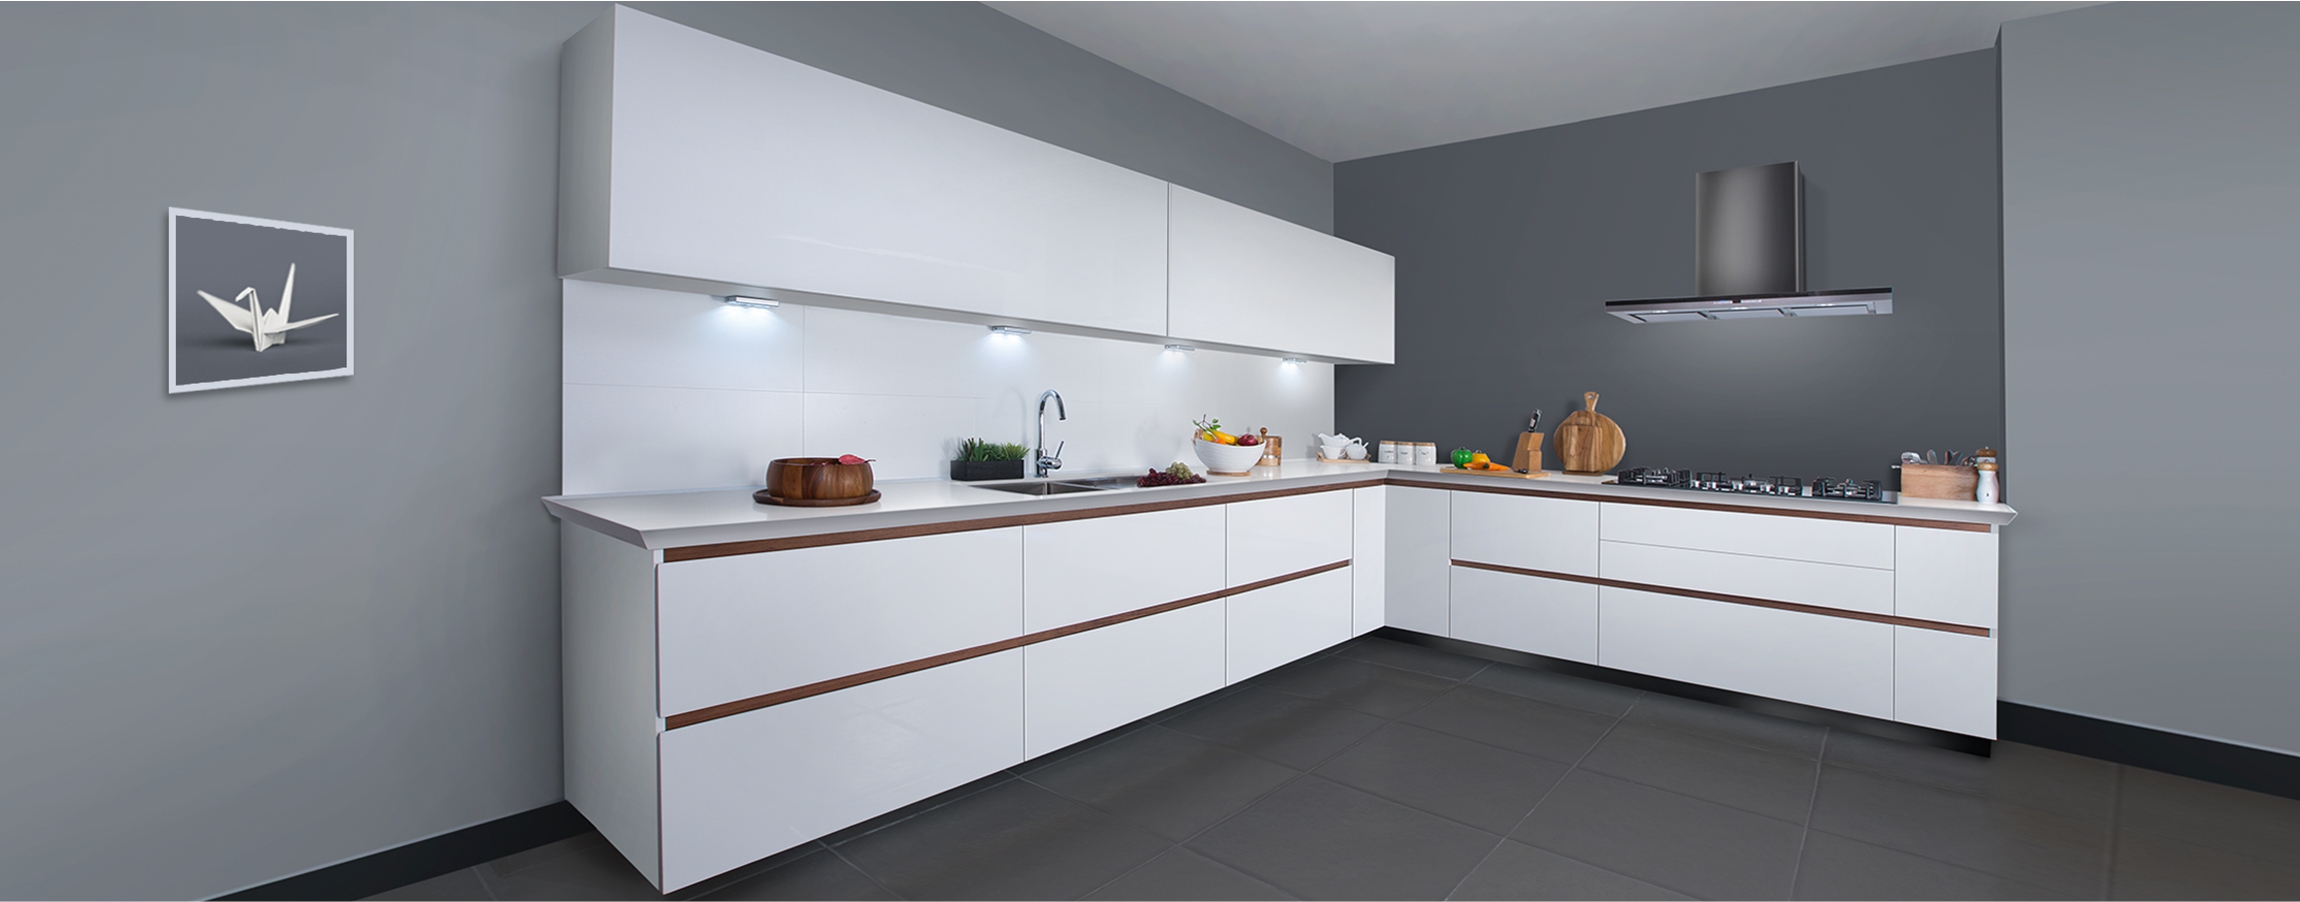 Select from wide range of sleek kitchen designs